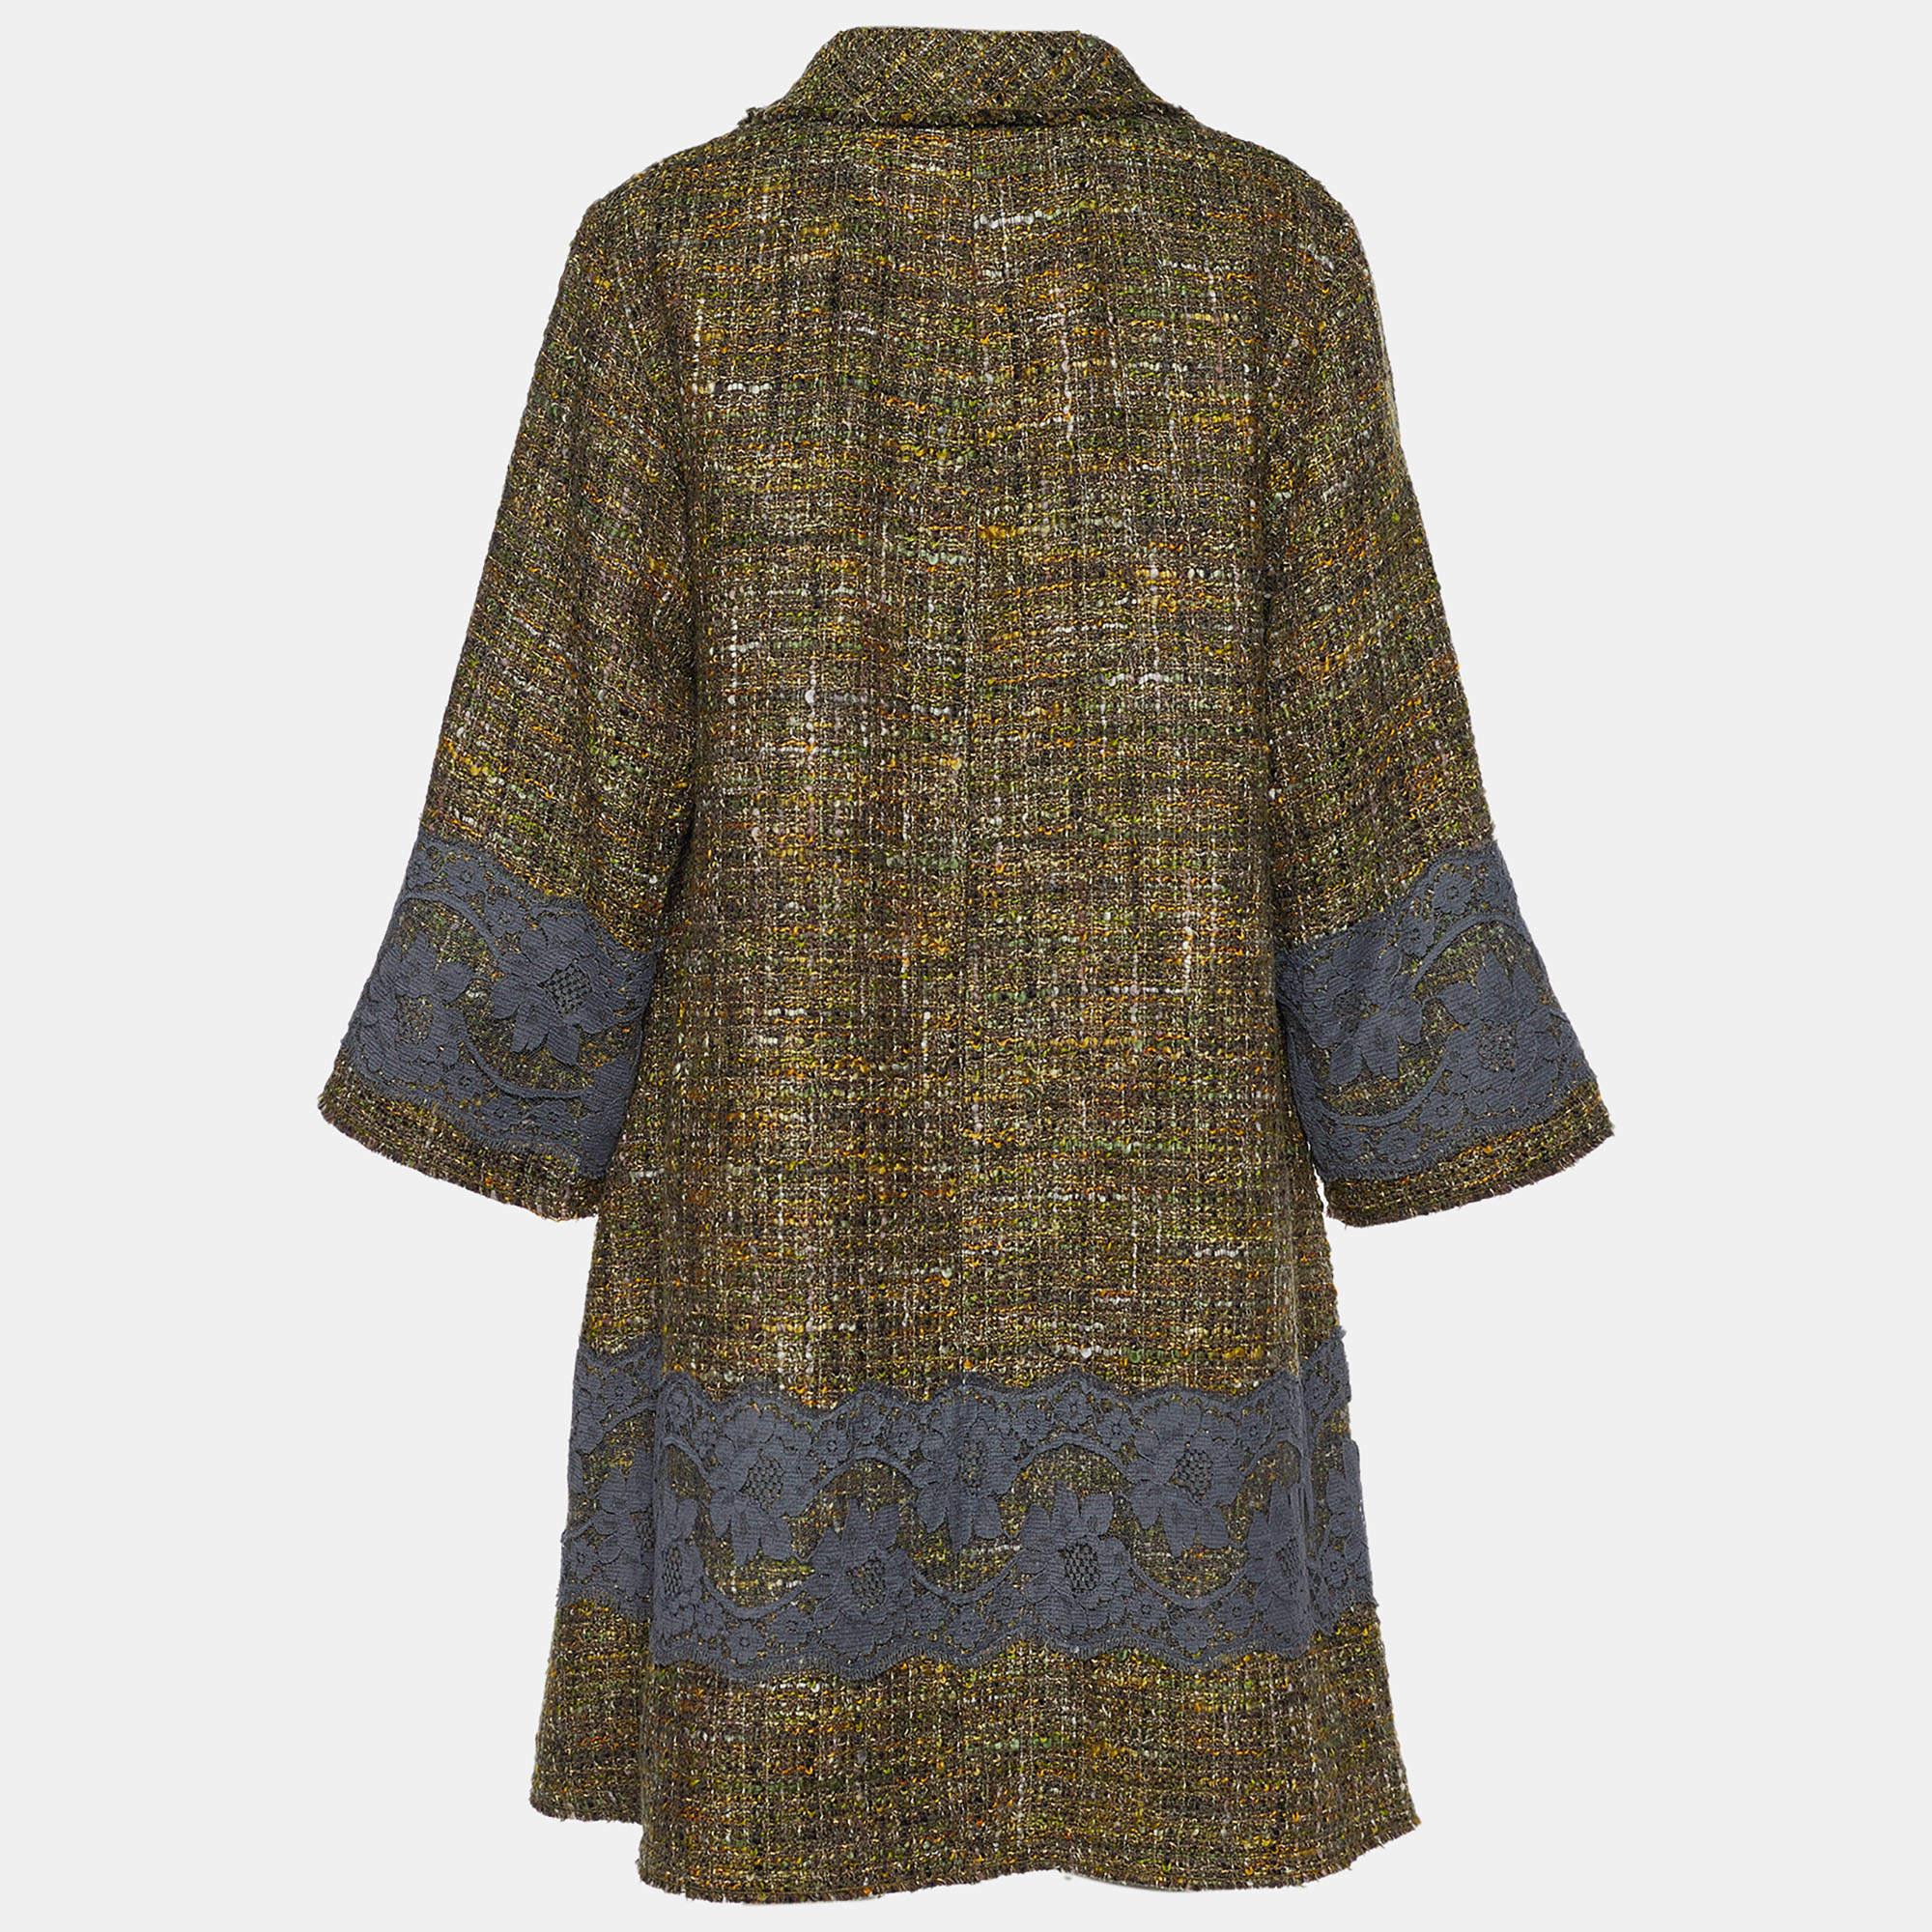 Make a practical investment in luxury fashion with this coat from the House of Dolce & Gabbana. It is tailored using green tweed fabric, which is augmented with lace appliques. It is provided with long sleeves, buttoned closures, and two pockets.